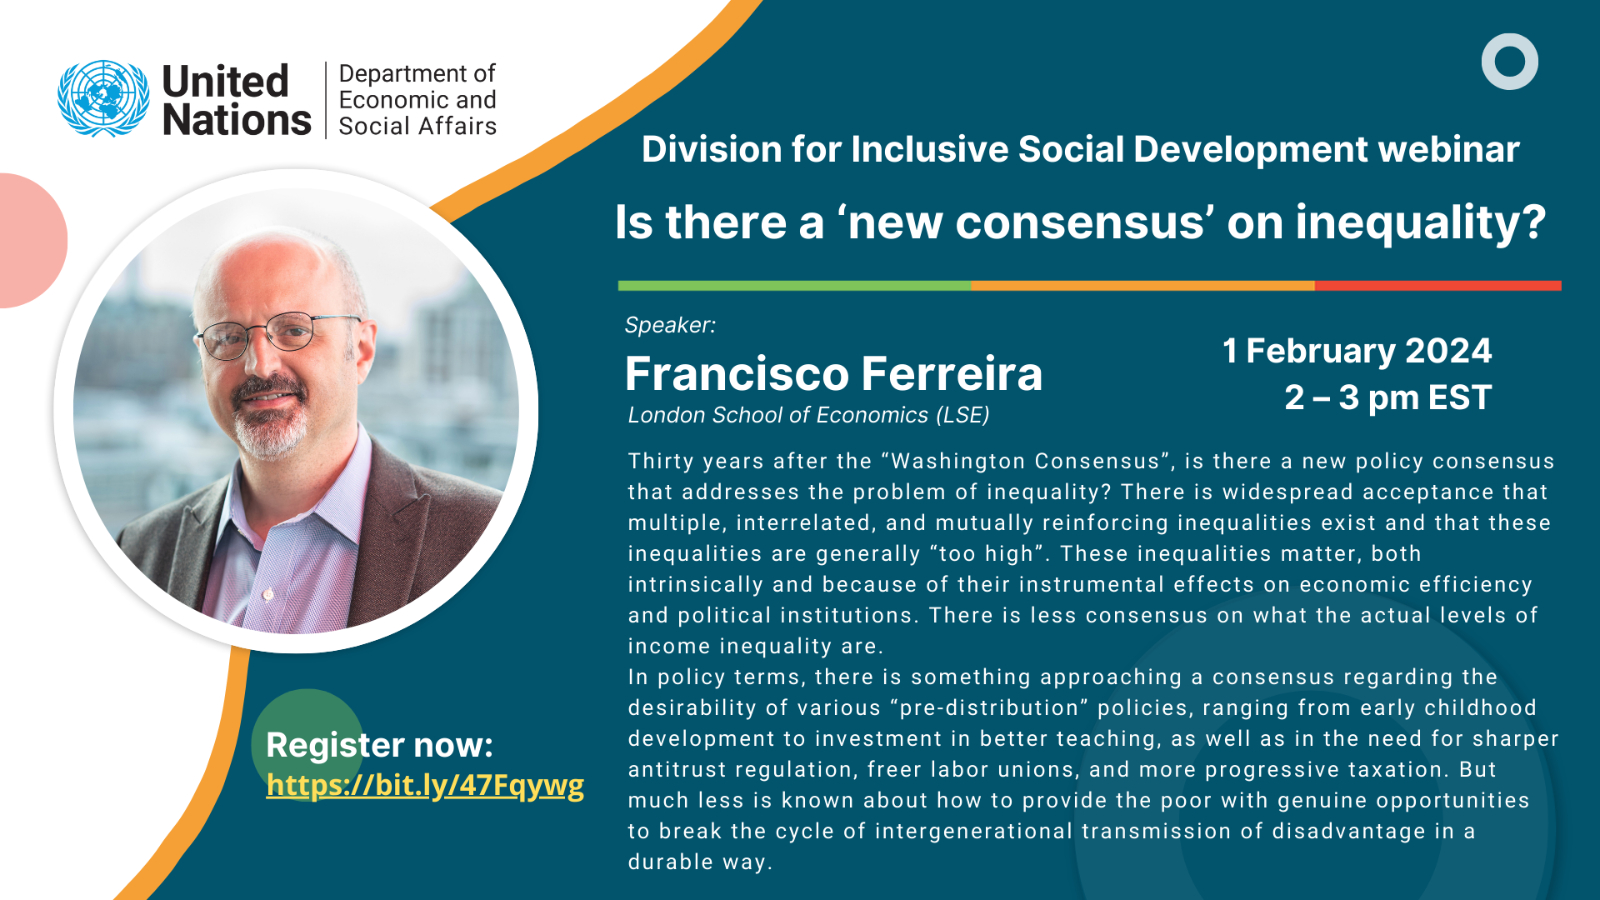 UN DESA DISD Webinar on "Is there a ‘new consensus’ on inequality?"